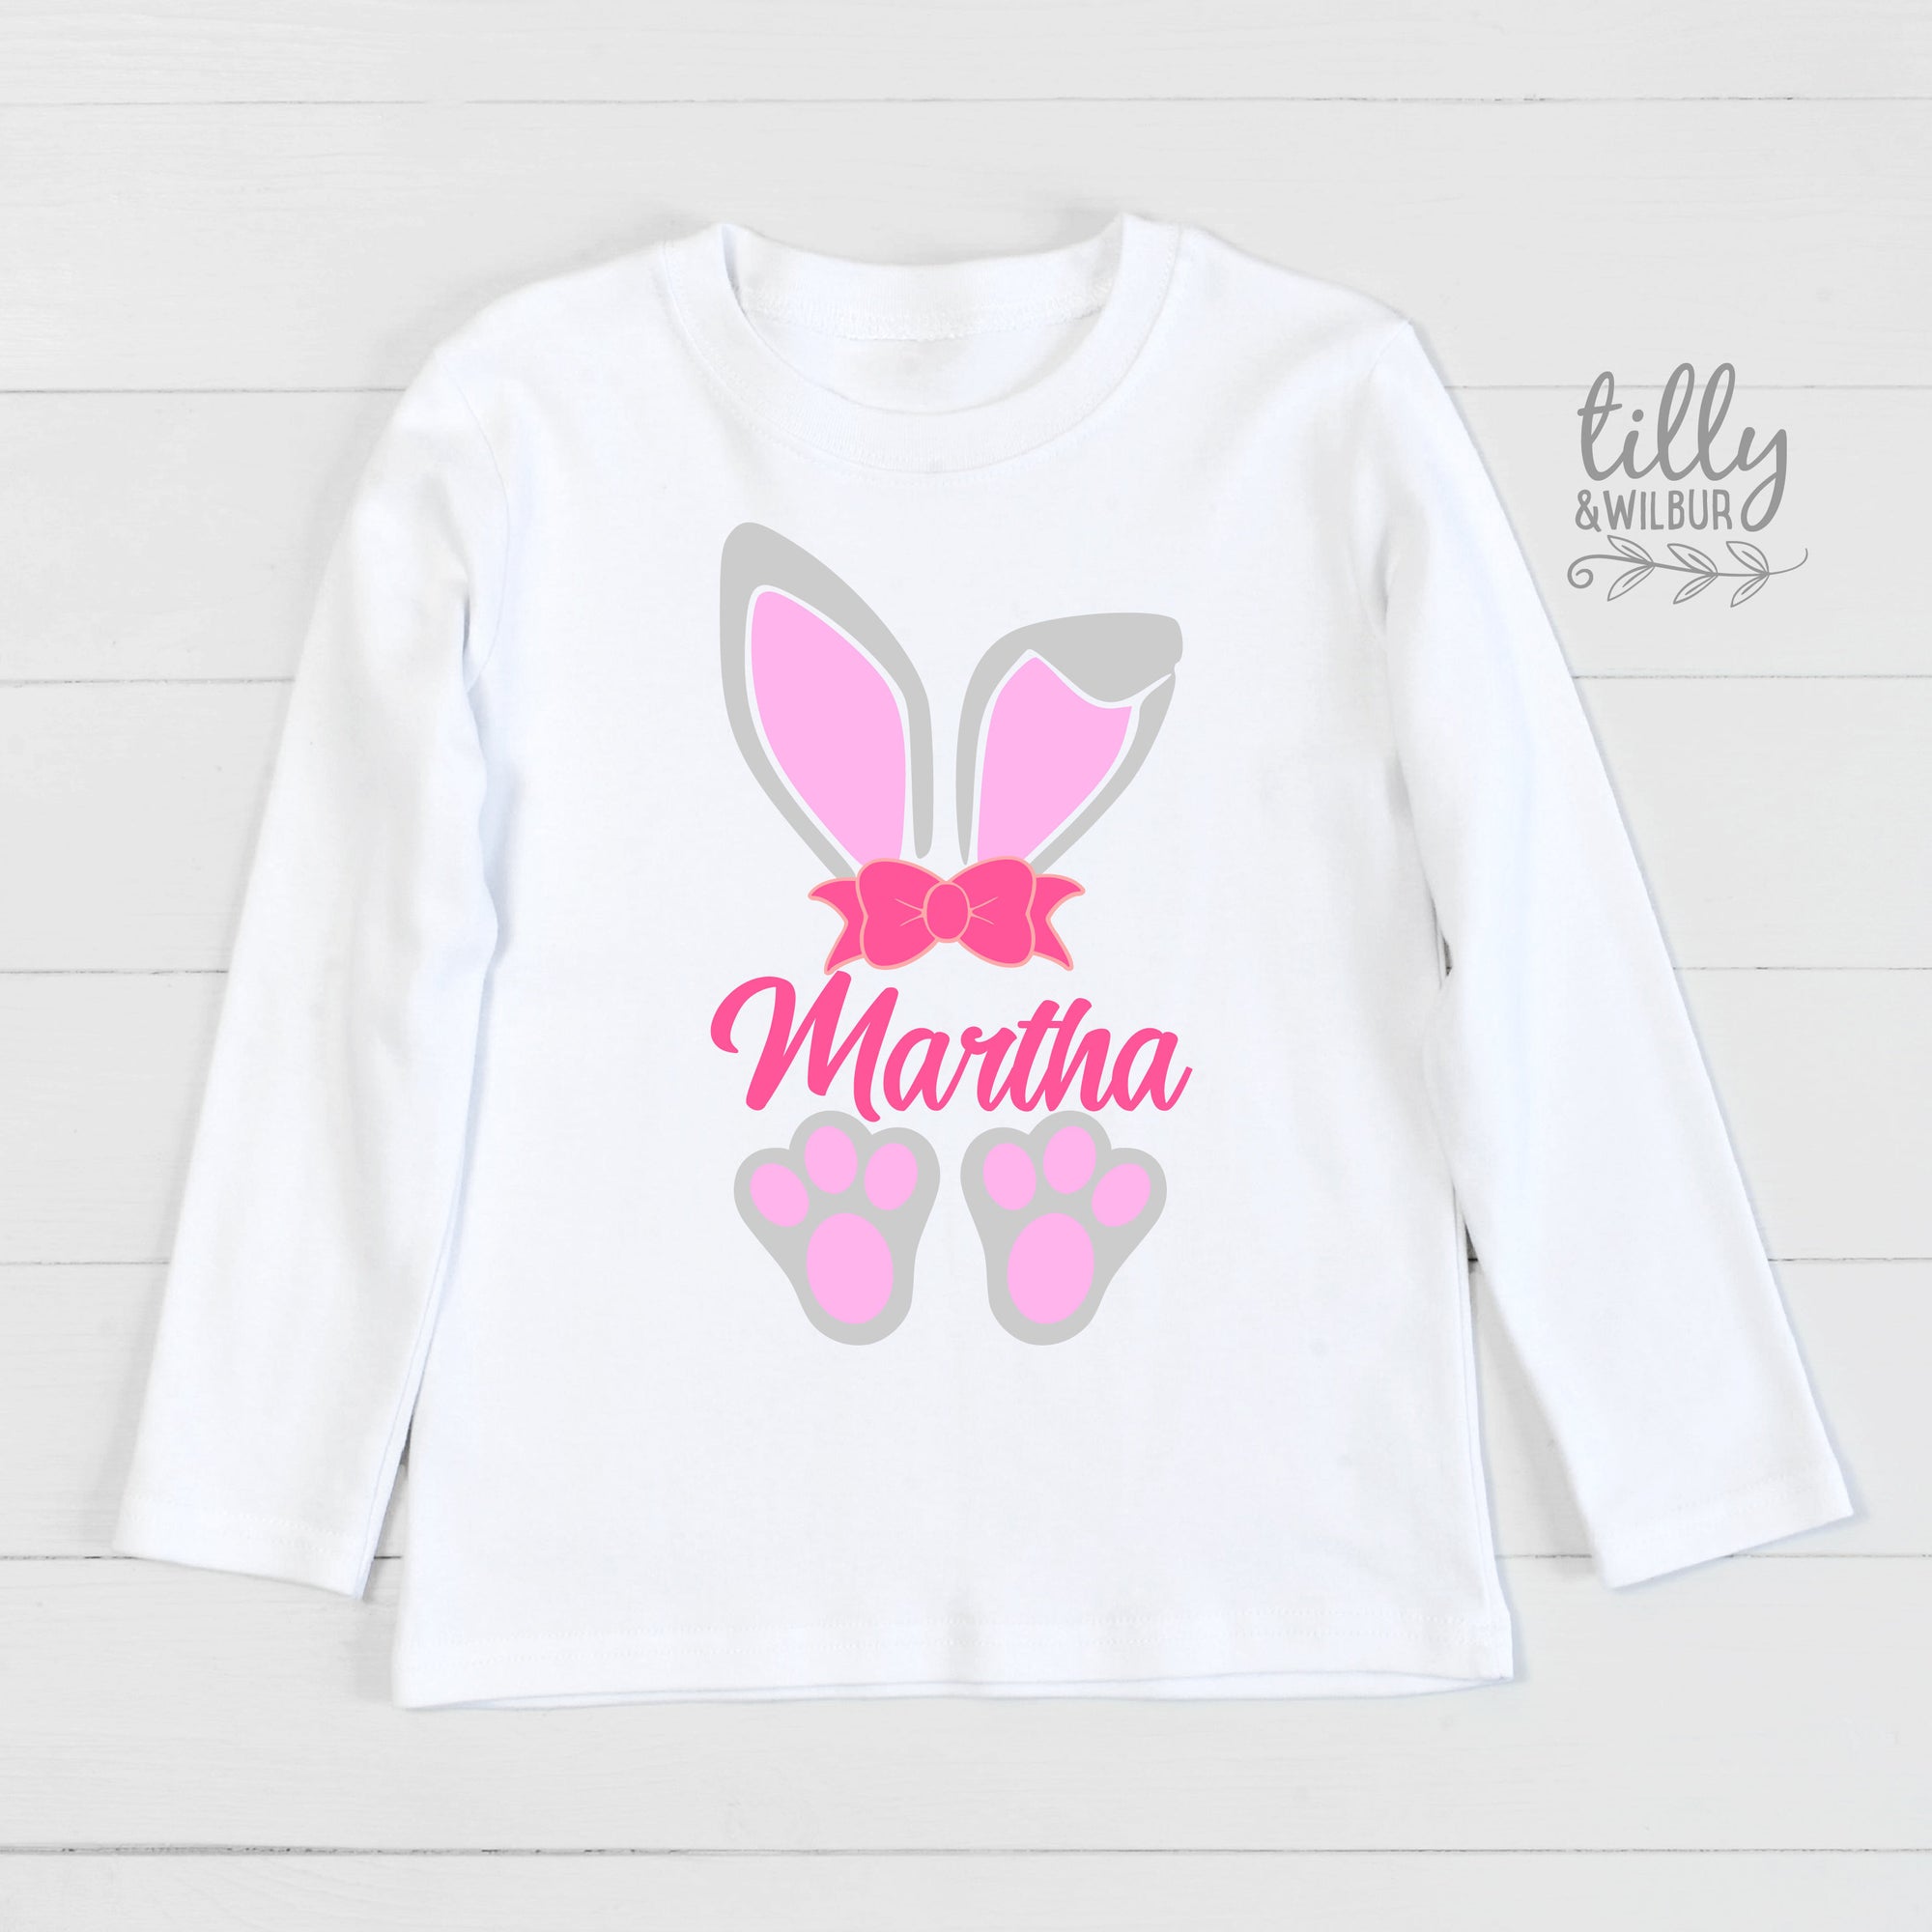 Personalised Easter T-Shirt For Girls, Bunny Ears And Feet, Easter T-Shirt, Girls Easter Gift, Girls Easter Outfit, Girls Easter Clothing